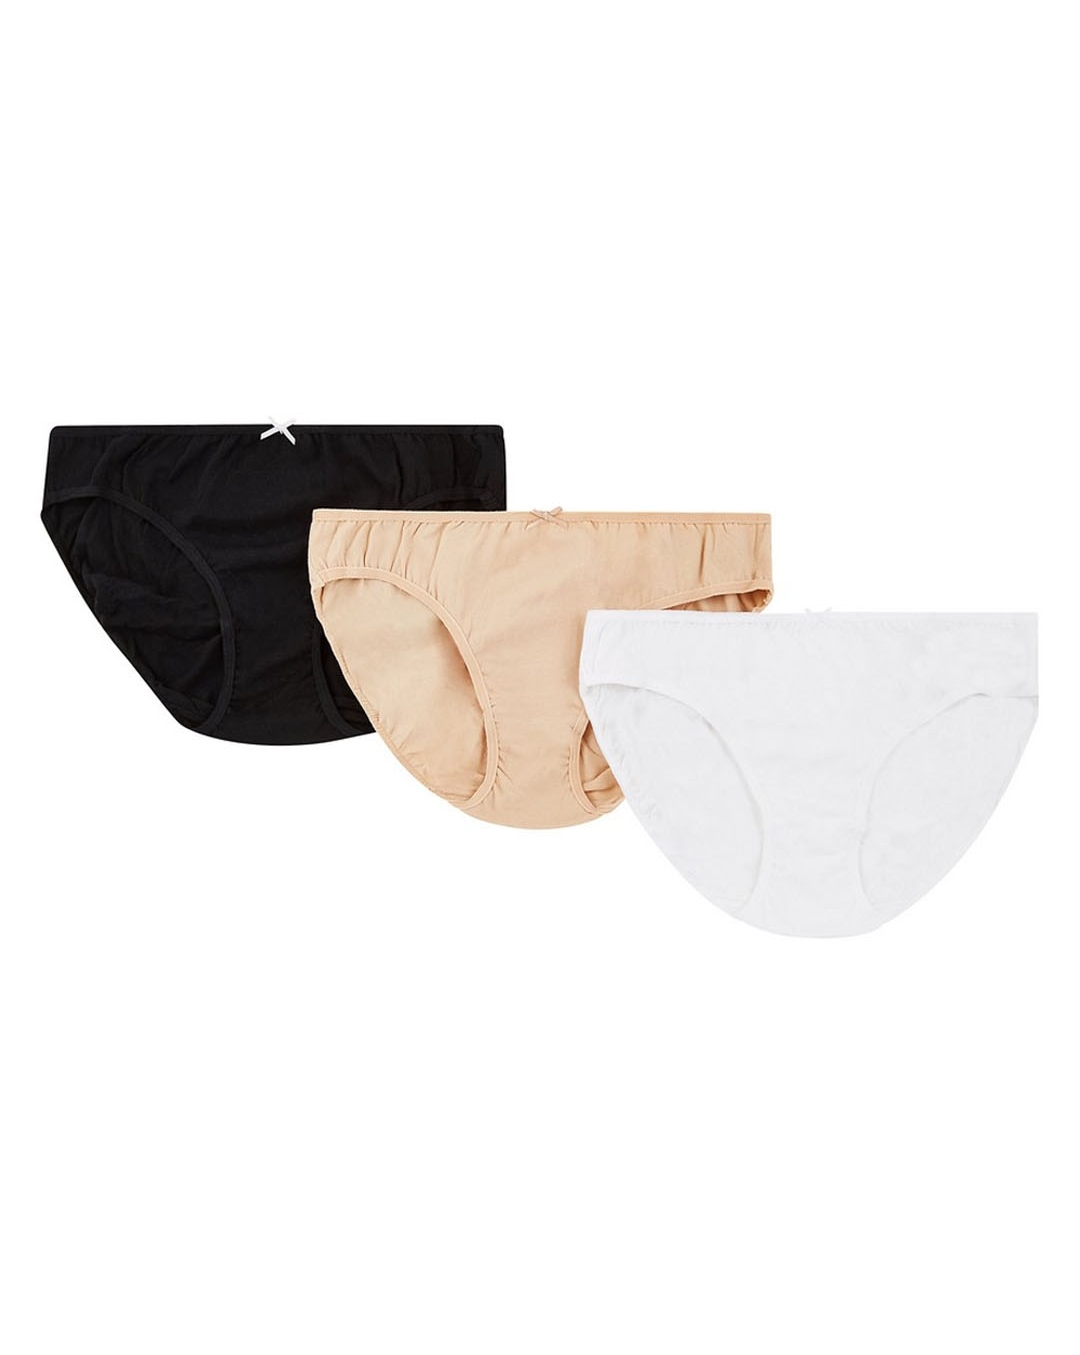 Nearly Nude Maternity Brief, 3-pack